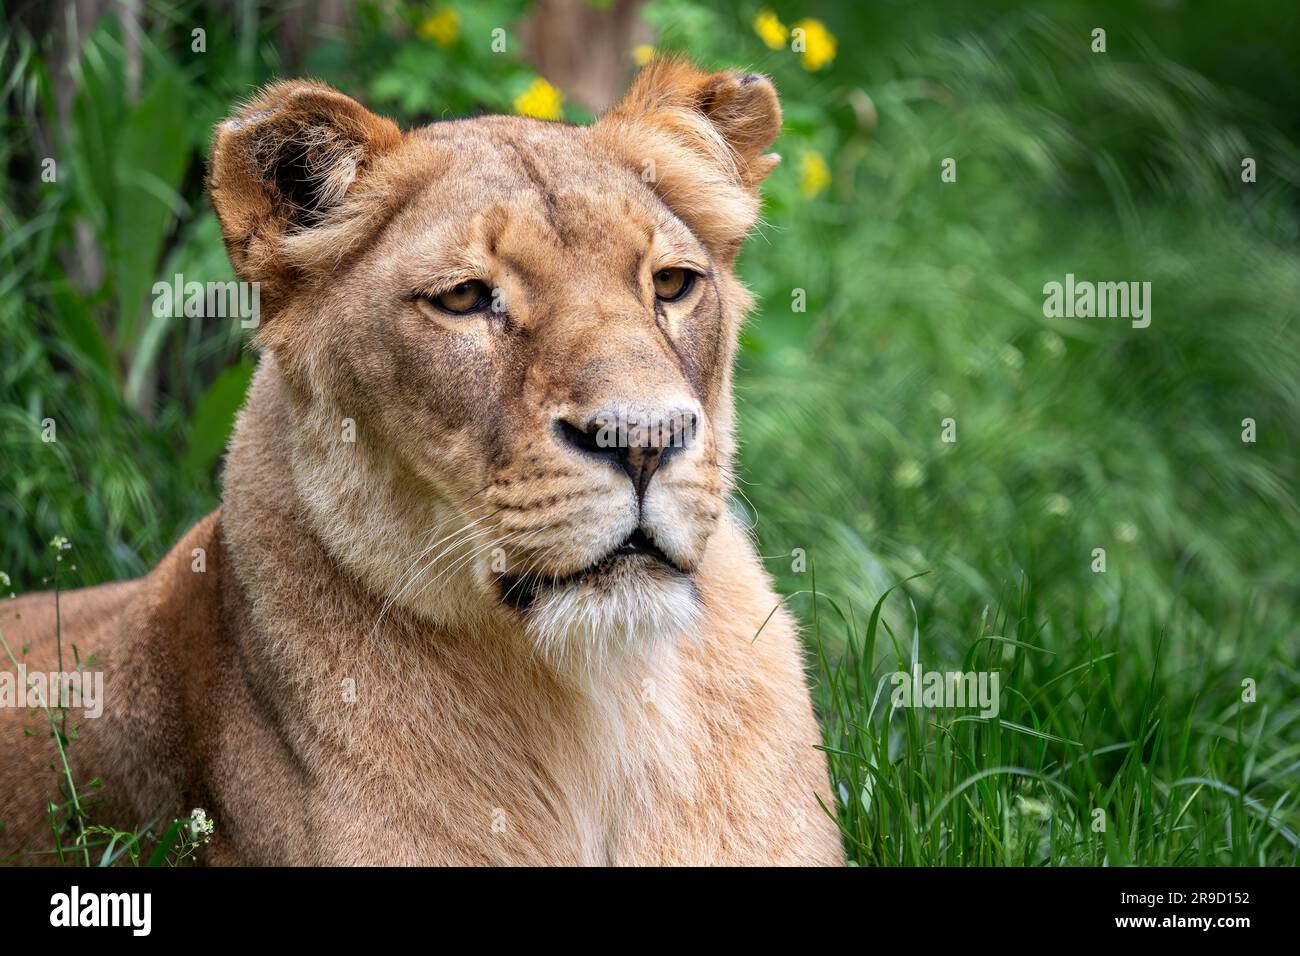 Katanga Lion or Southwest African Lion, panthera leo bleyenberghi. Lioness in the grass. Stock Photo